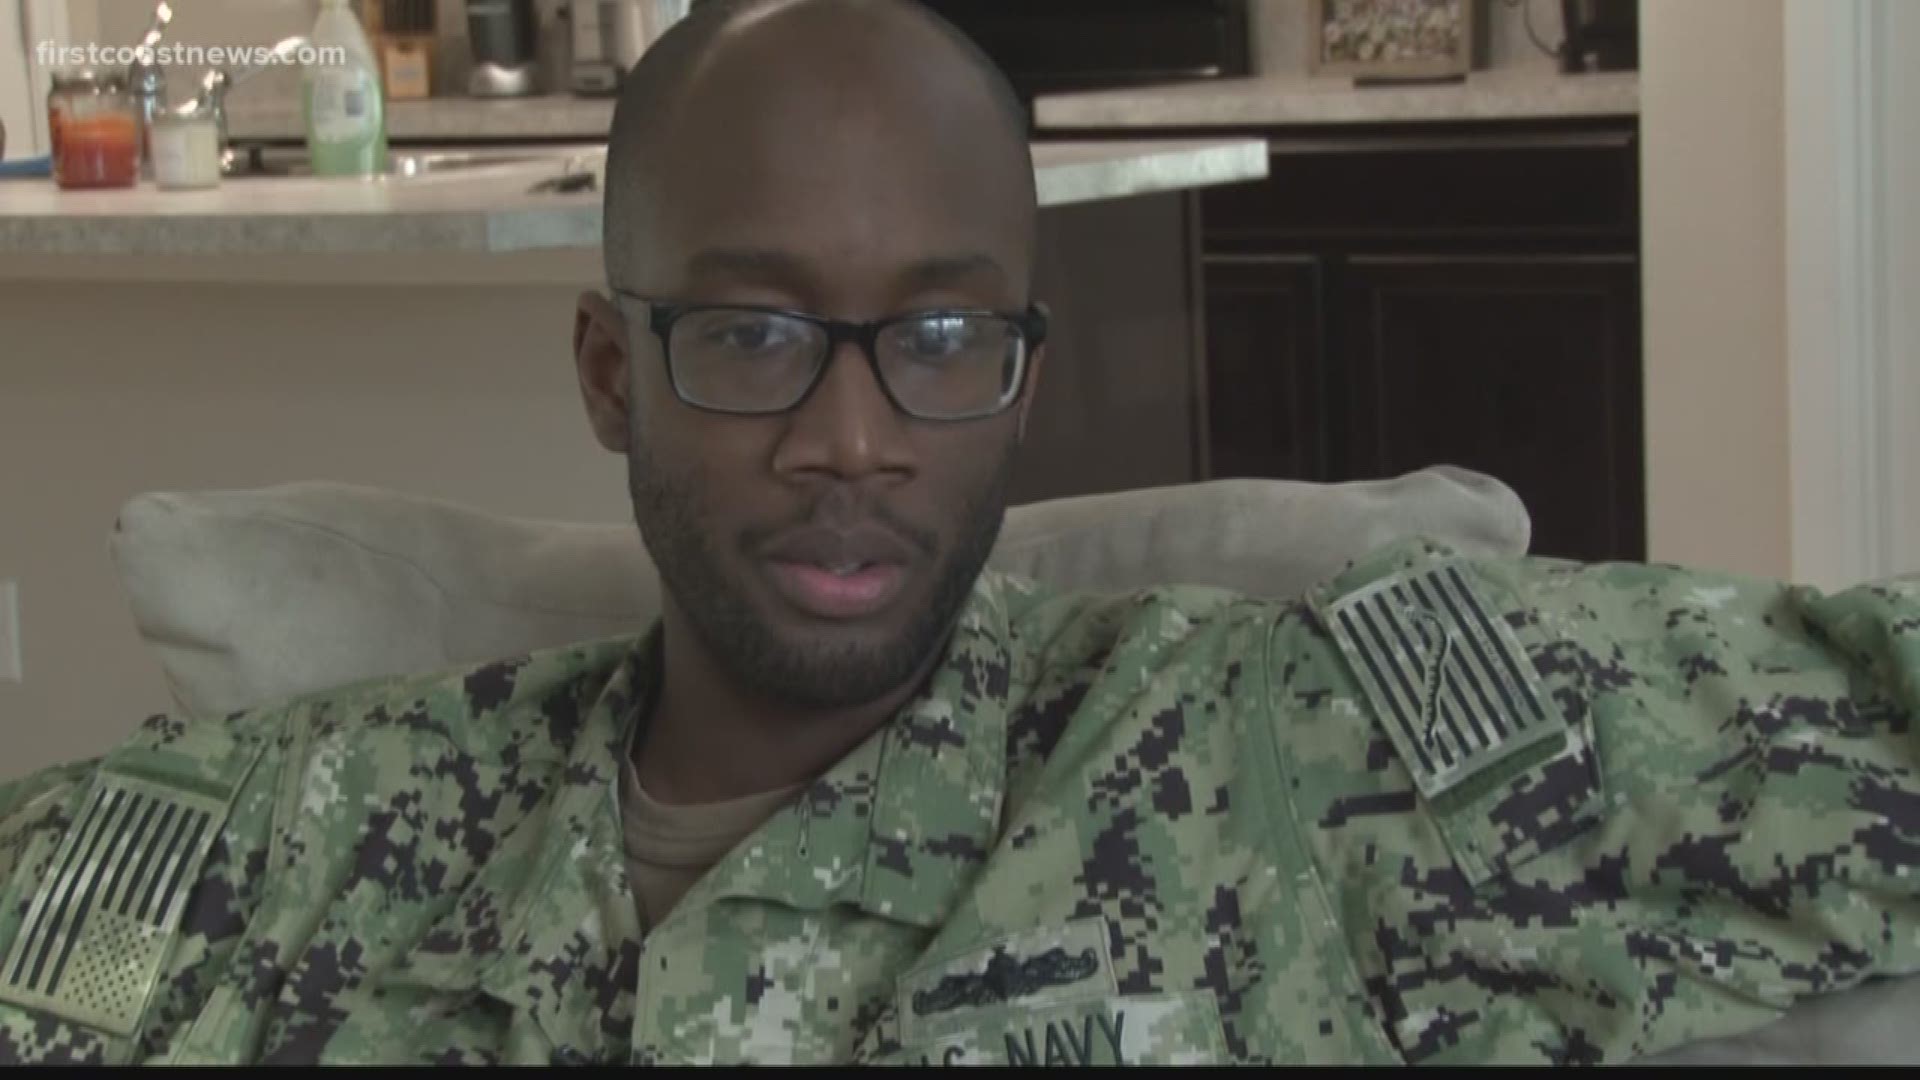 A local Navy Petty Officer is celebrating the new year in a new home, being the first in his family to accomplish a goal that once seemed out of reach.